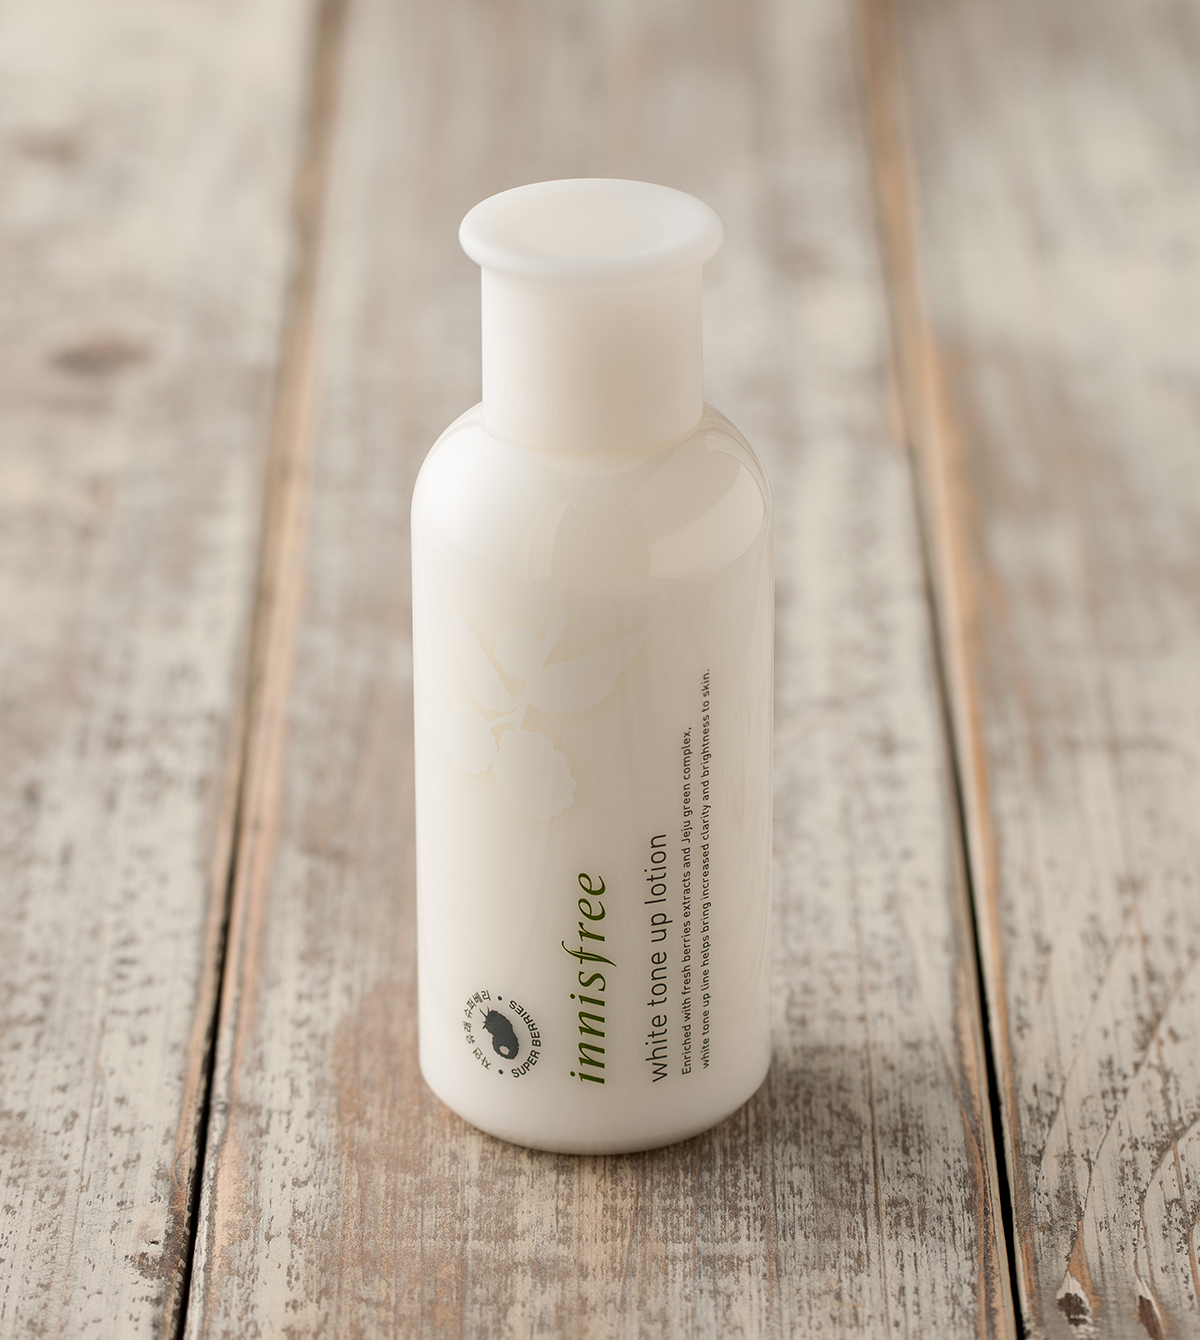 Innisfree White Tone Up Lotion - 12 Skin Care Products from Innisfree India to Stock in 2018 - Check out Reviews & Price